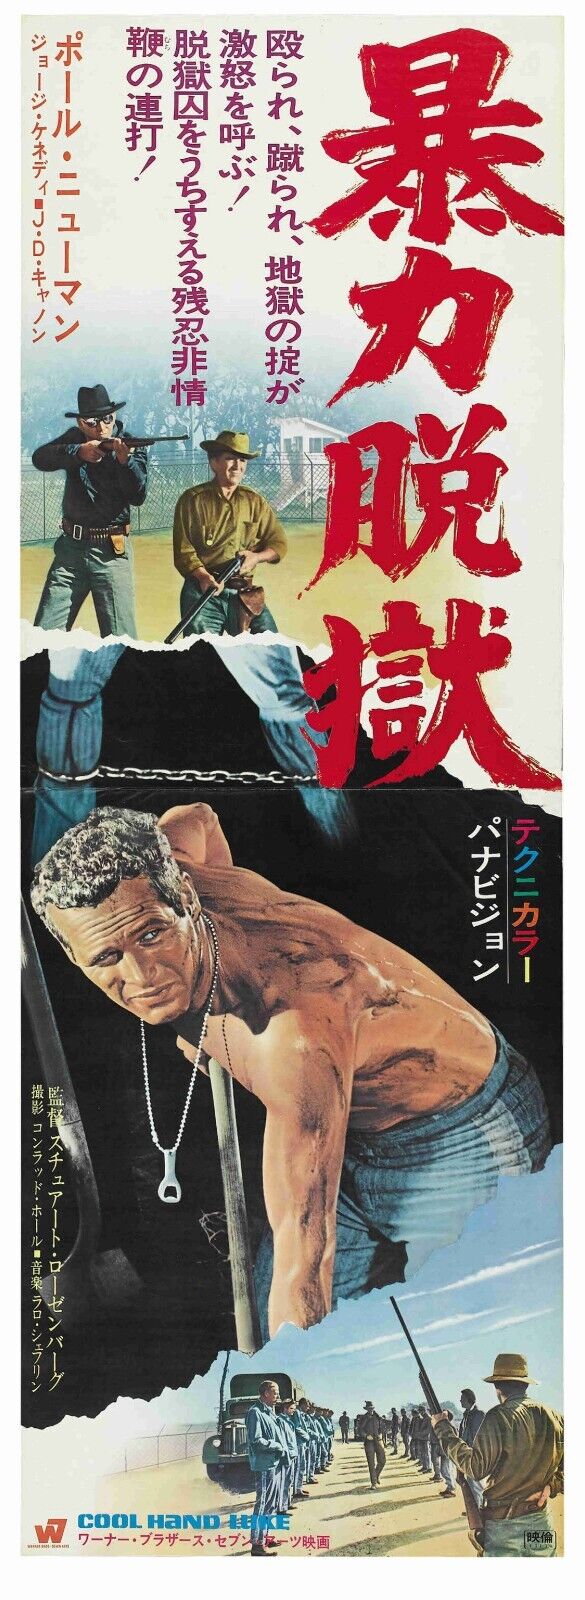 Cool Hand Luke 20 x 56 Japanese Poster closeout sale